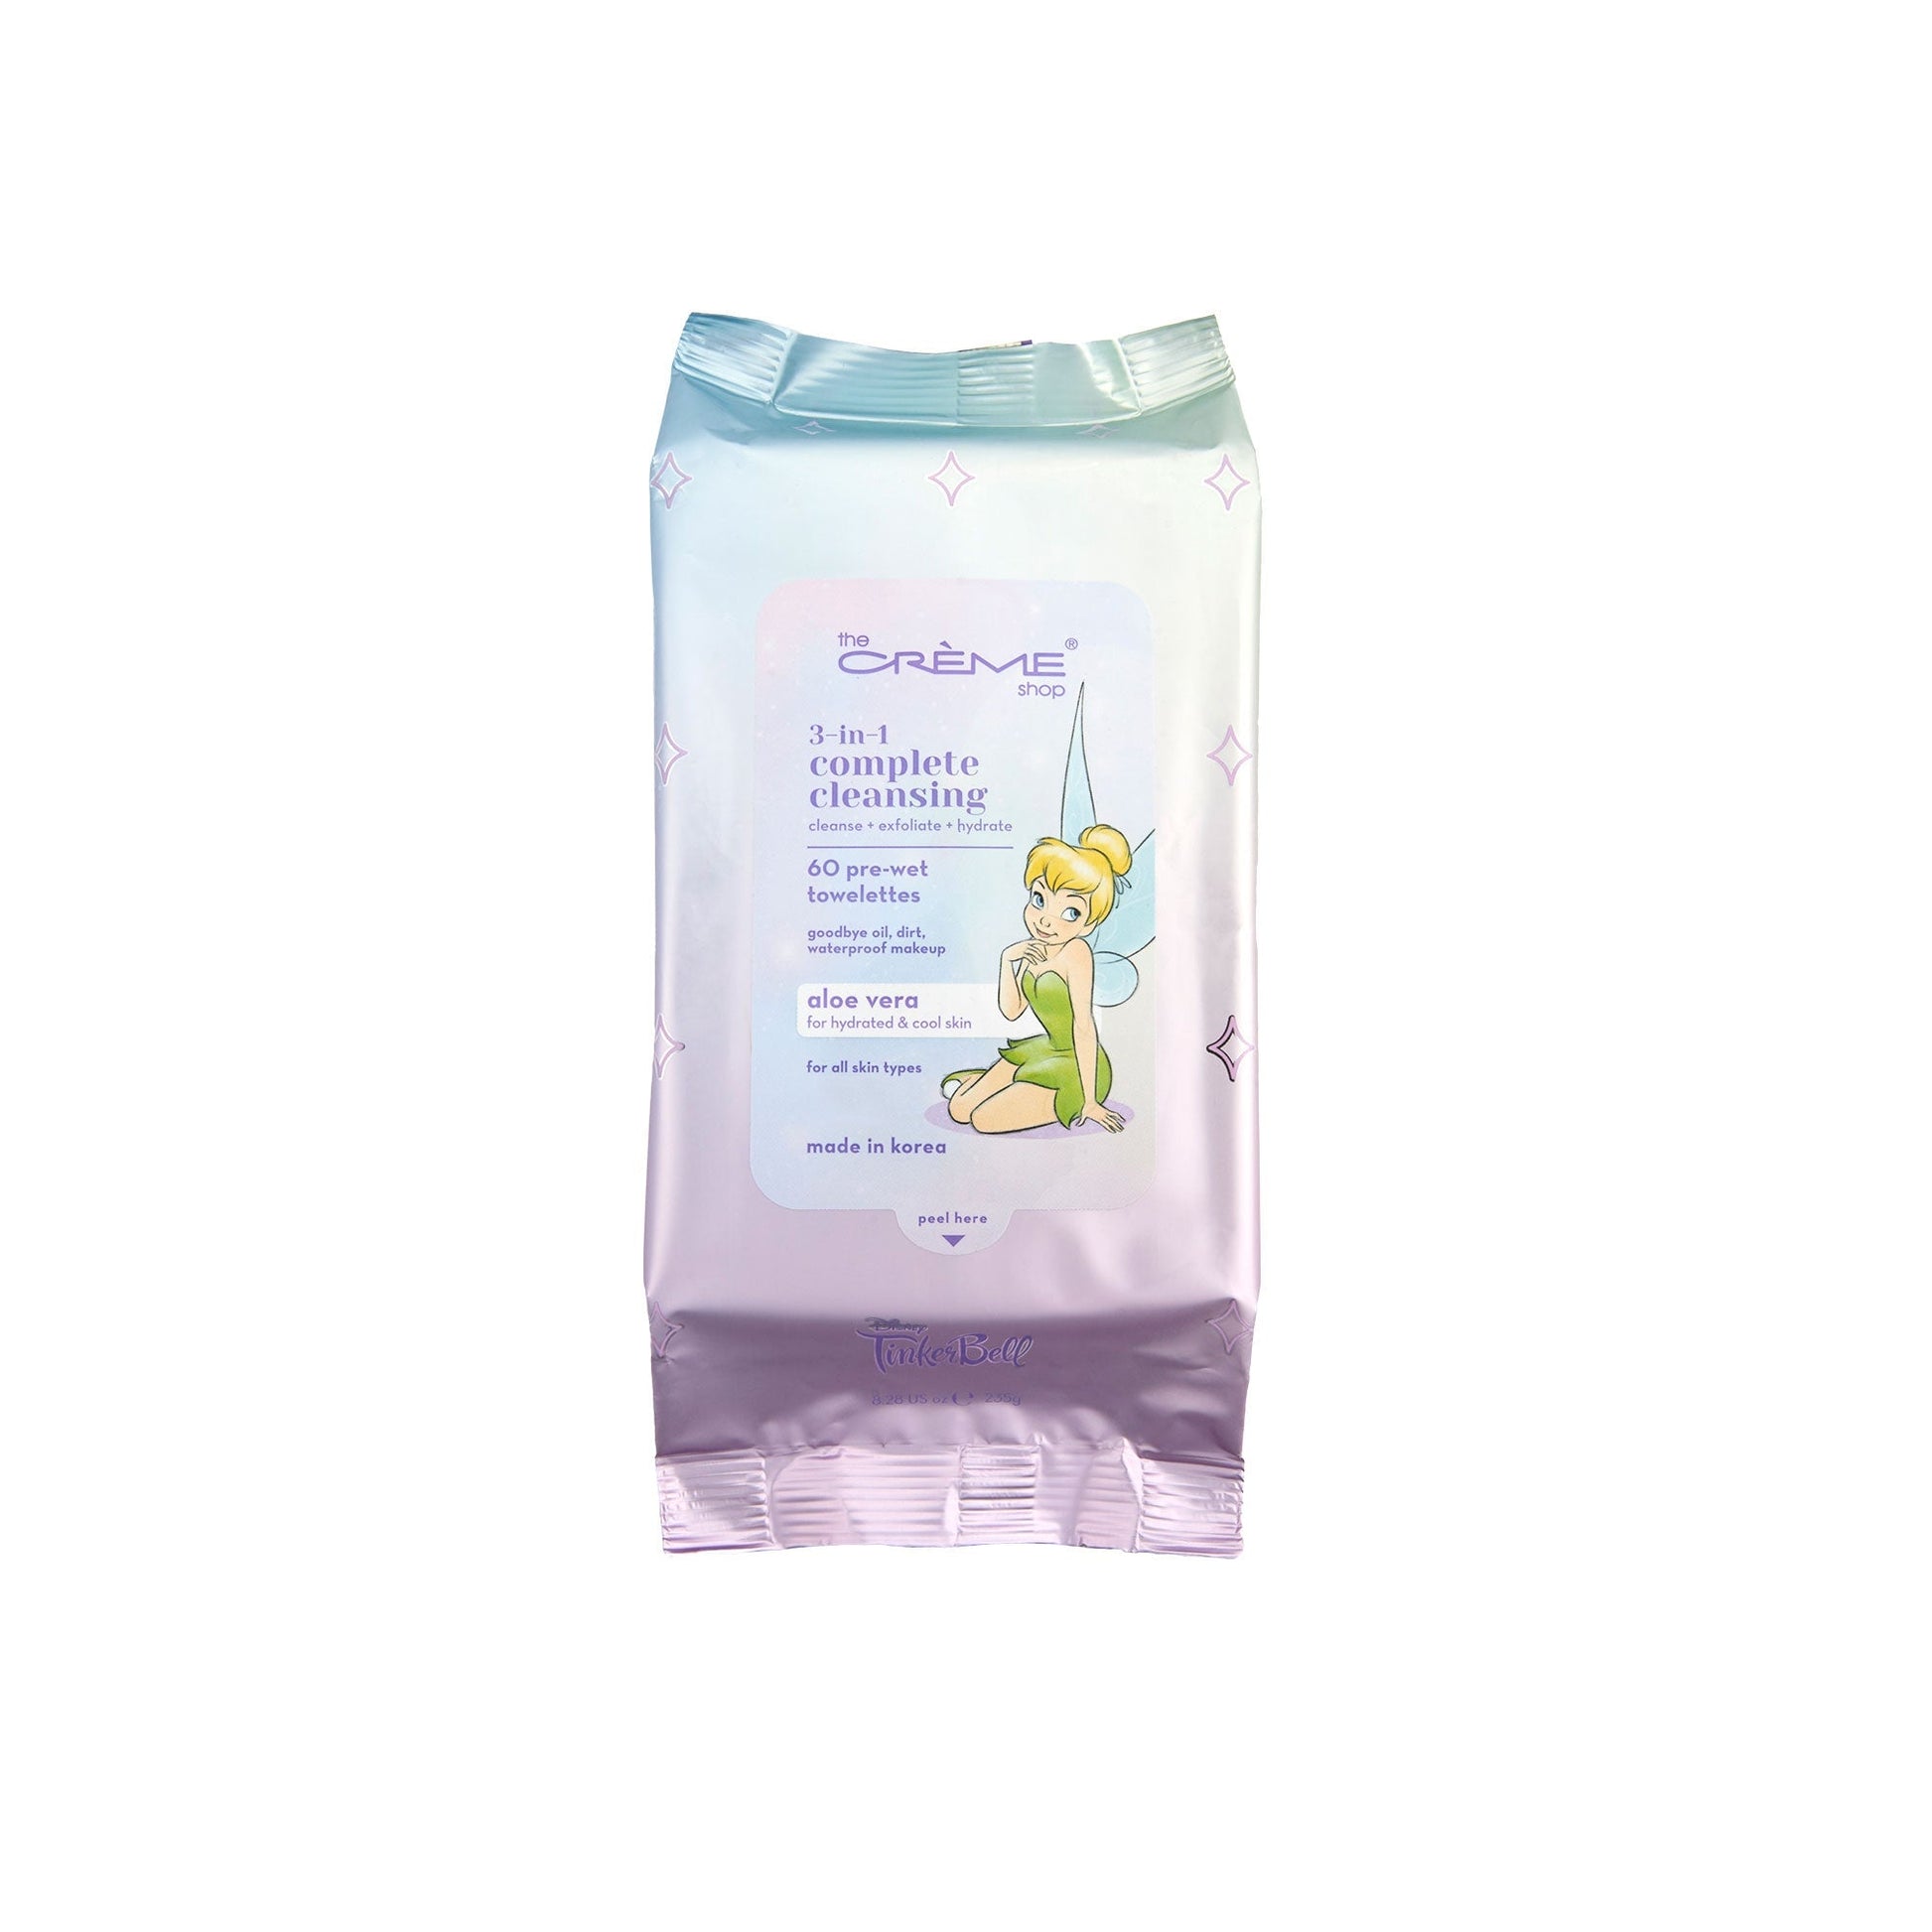 Tinkerbell 3-in-1 Complete Cleansing Towelettes - Cooling Aloe Vera The Crème Shop x Disney 